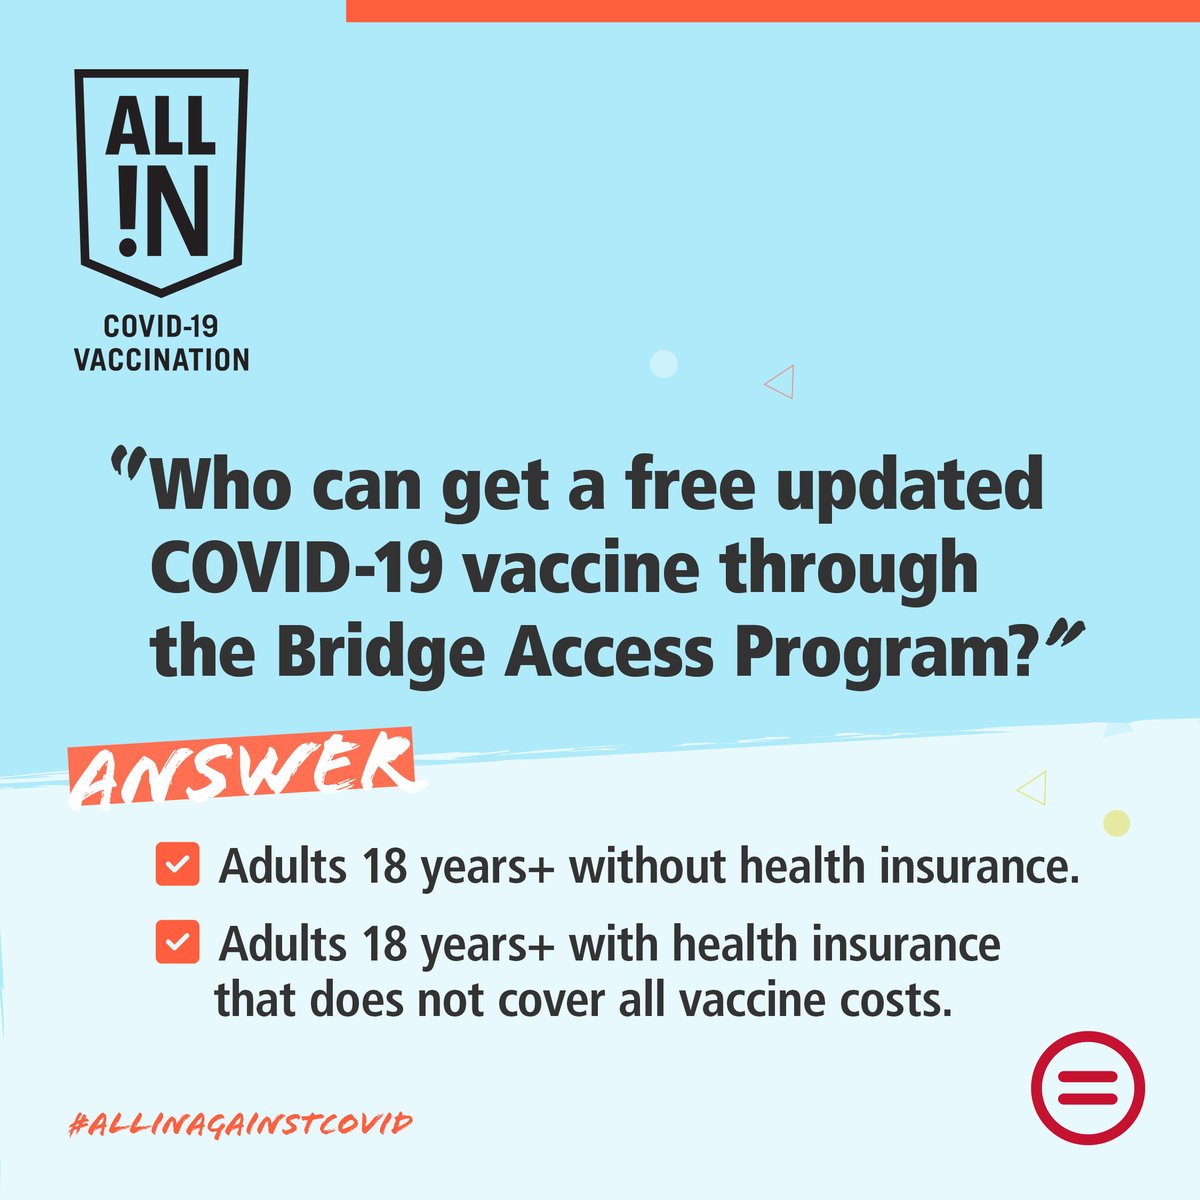 The Bridge Access Program was developed to assist adults without health insurance & adults whose insurance does not cover all COVID-19 vaccine costs. Take advantage of the program before it ends in December 2024: vaccines.gov. #ALLInAgainstCOVID